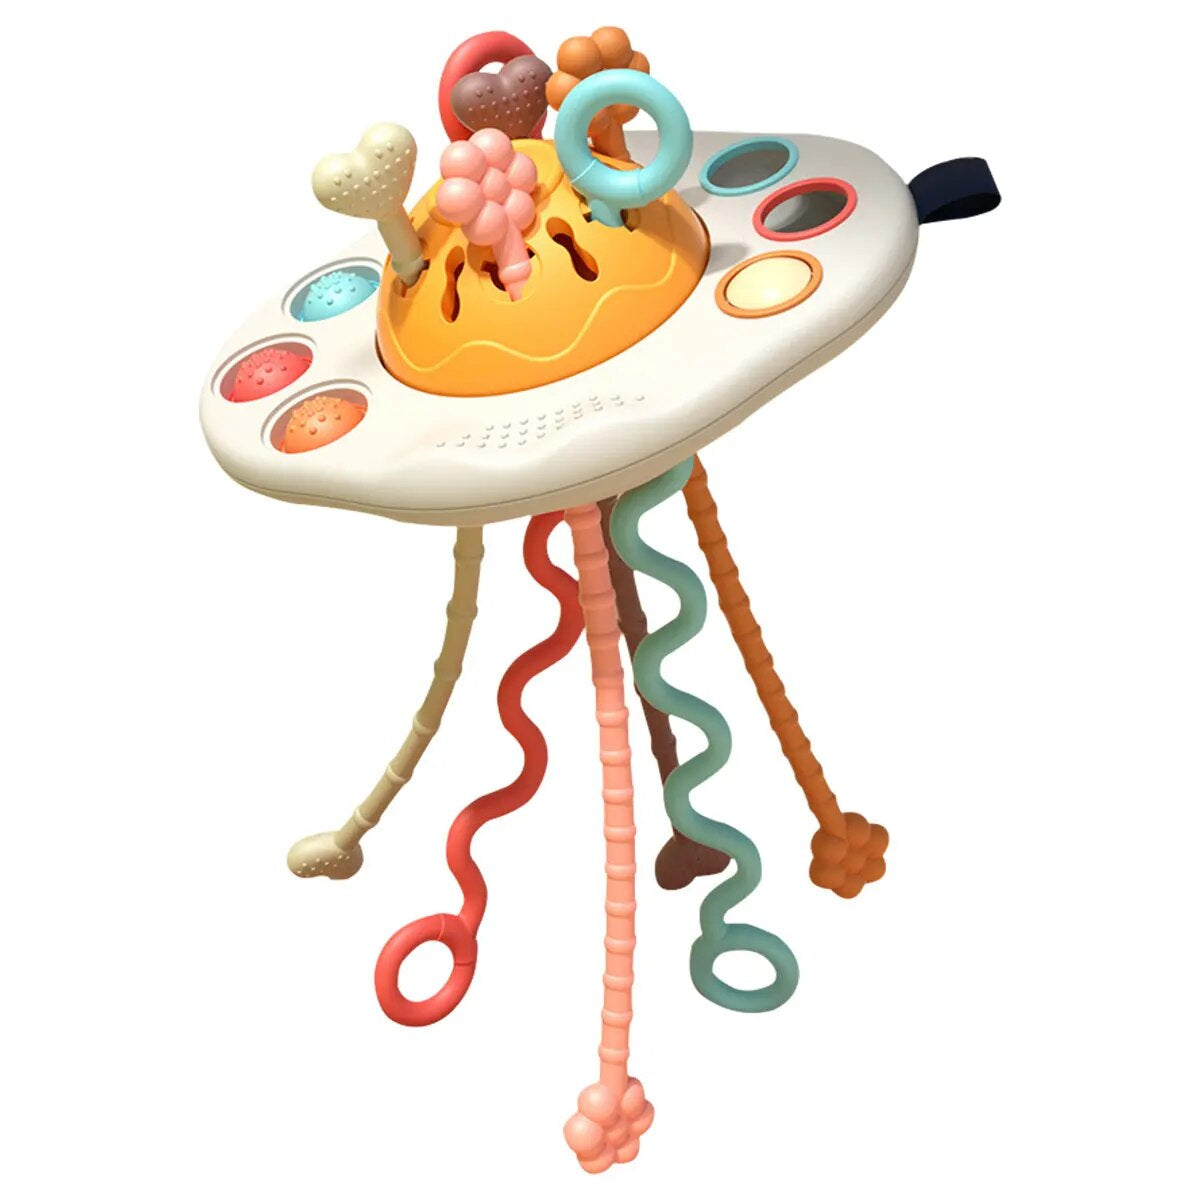 Pull String Activity Toy Food-Grade Silicone Montessori Pull String Toy Colorful Portable Baby Sensory Toy Fine Motor Skill Toys